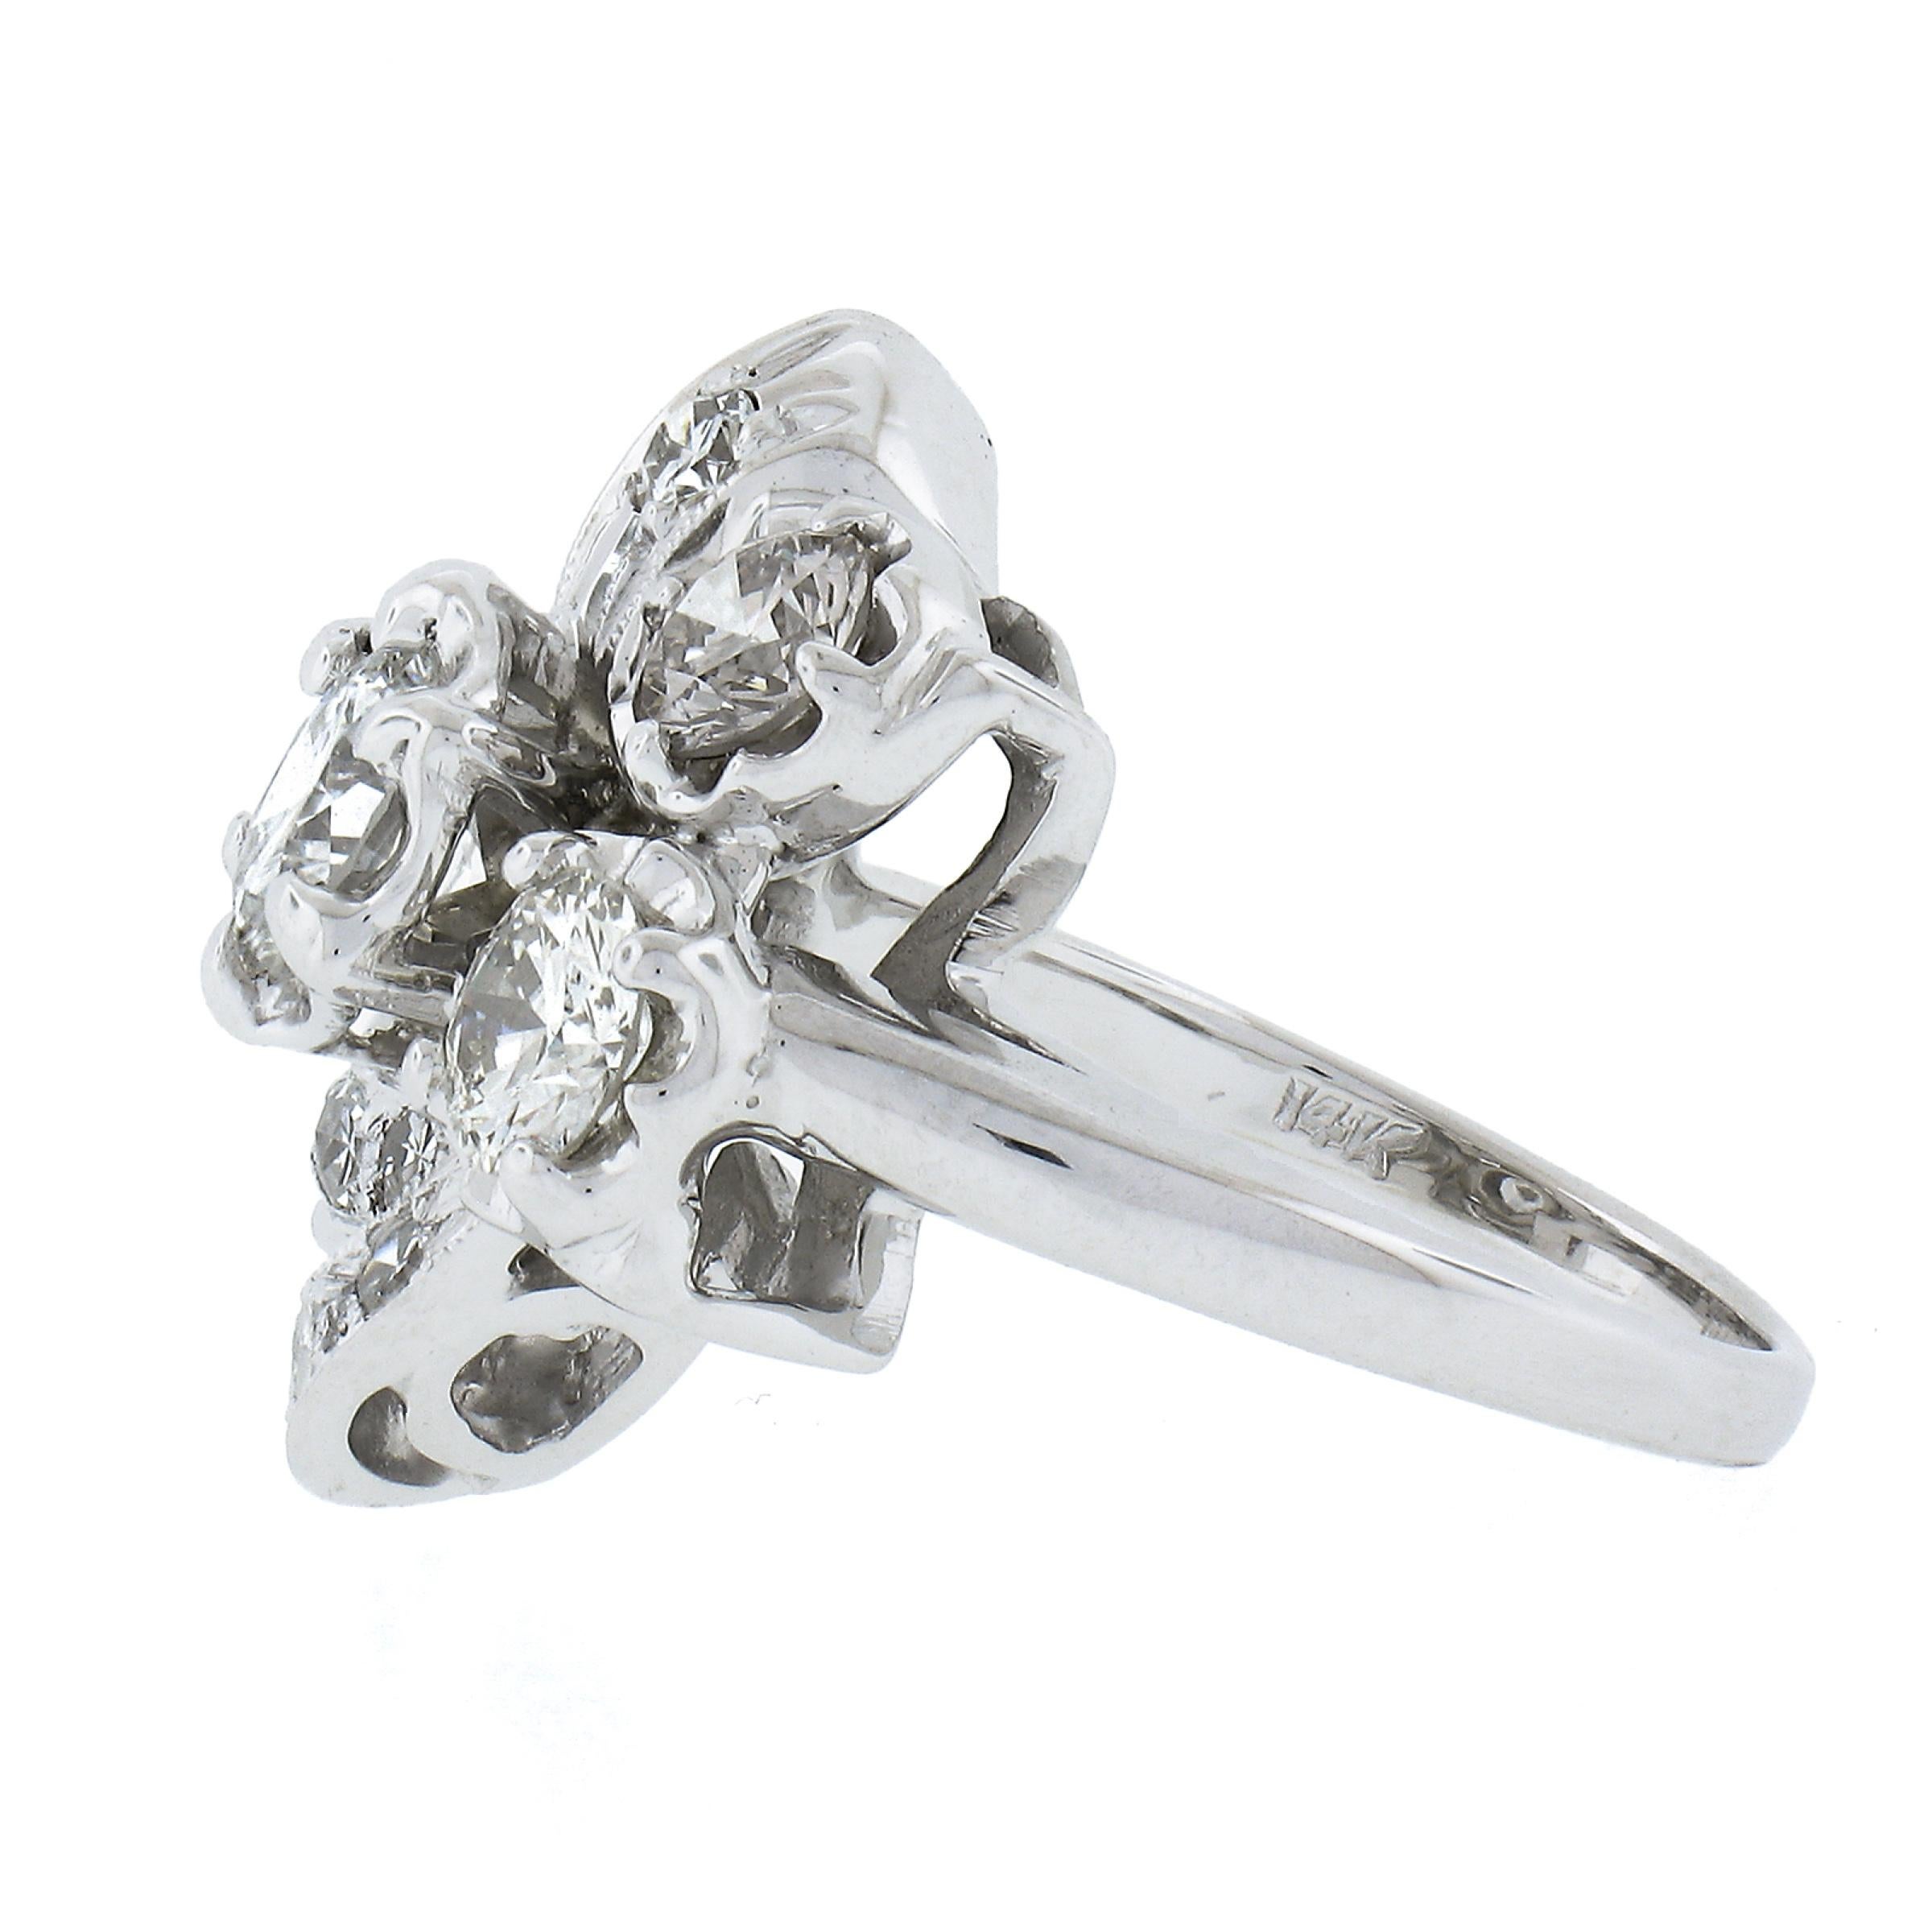 Vintage 14K White Gold 1.75ctw Fiery Diamond Polished Floral Cocktail Ring In Excellent Condition For Sale In Montclair, NJ